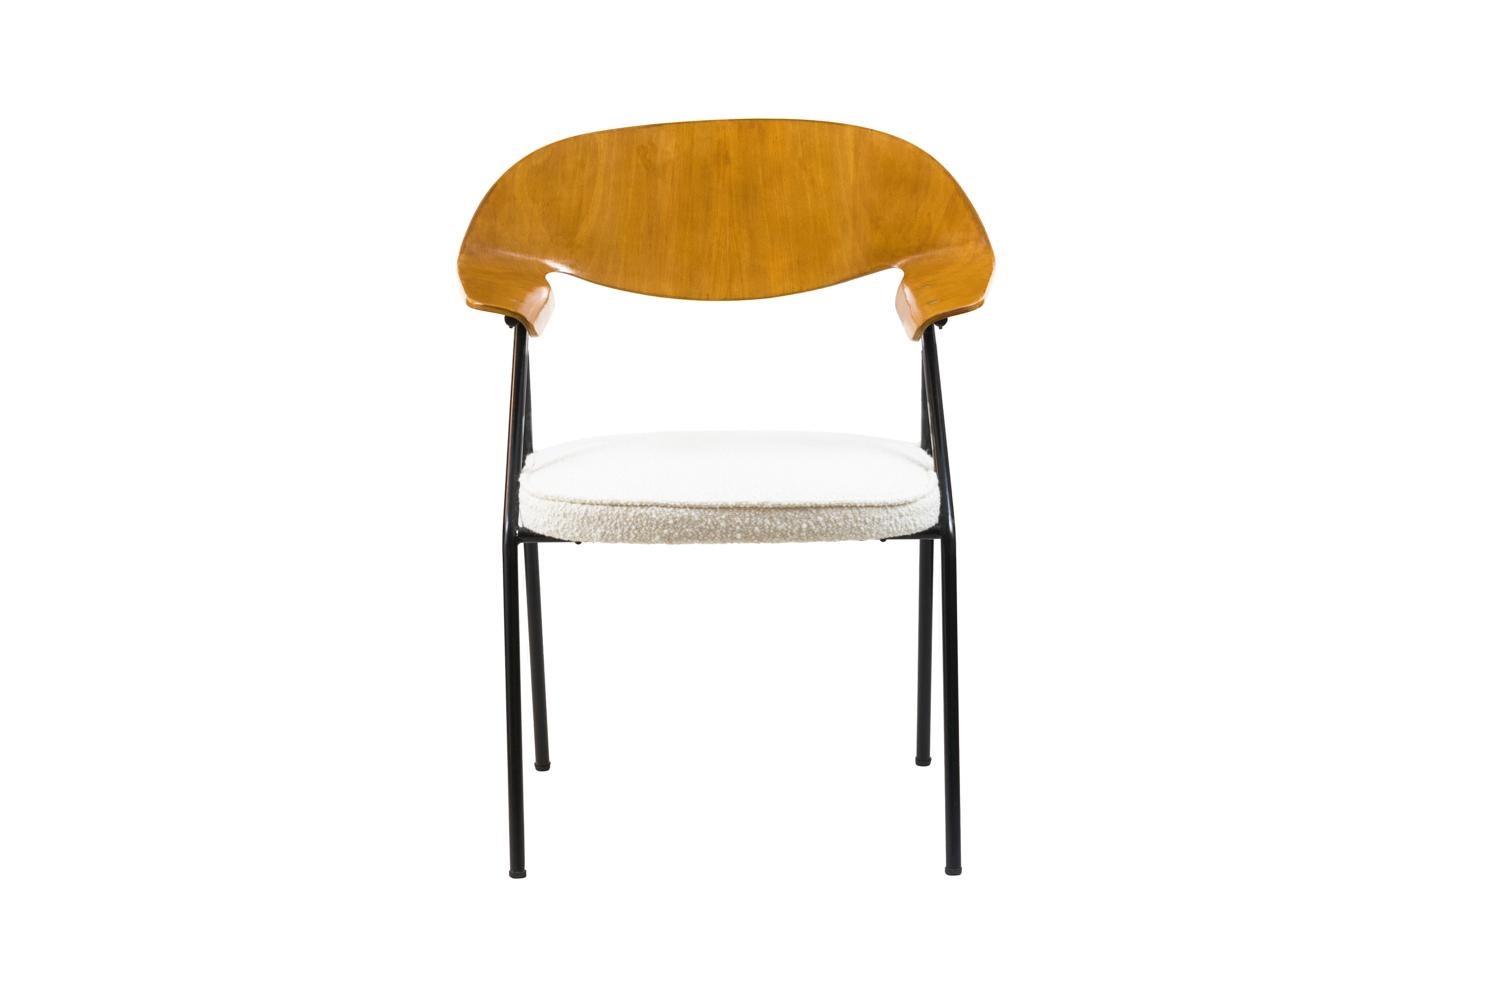 Robin day, in the style of.
Armchair standing on black lacquered tubular metal legs in reversed V-shape.
High back in molded plywood curved to obtain a curved back moving forward to the legs and forming two curved shape arms.

Trim entirely